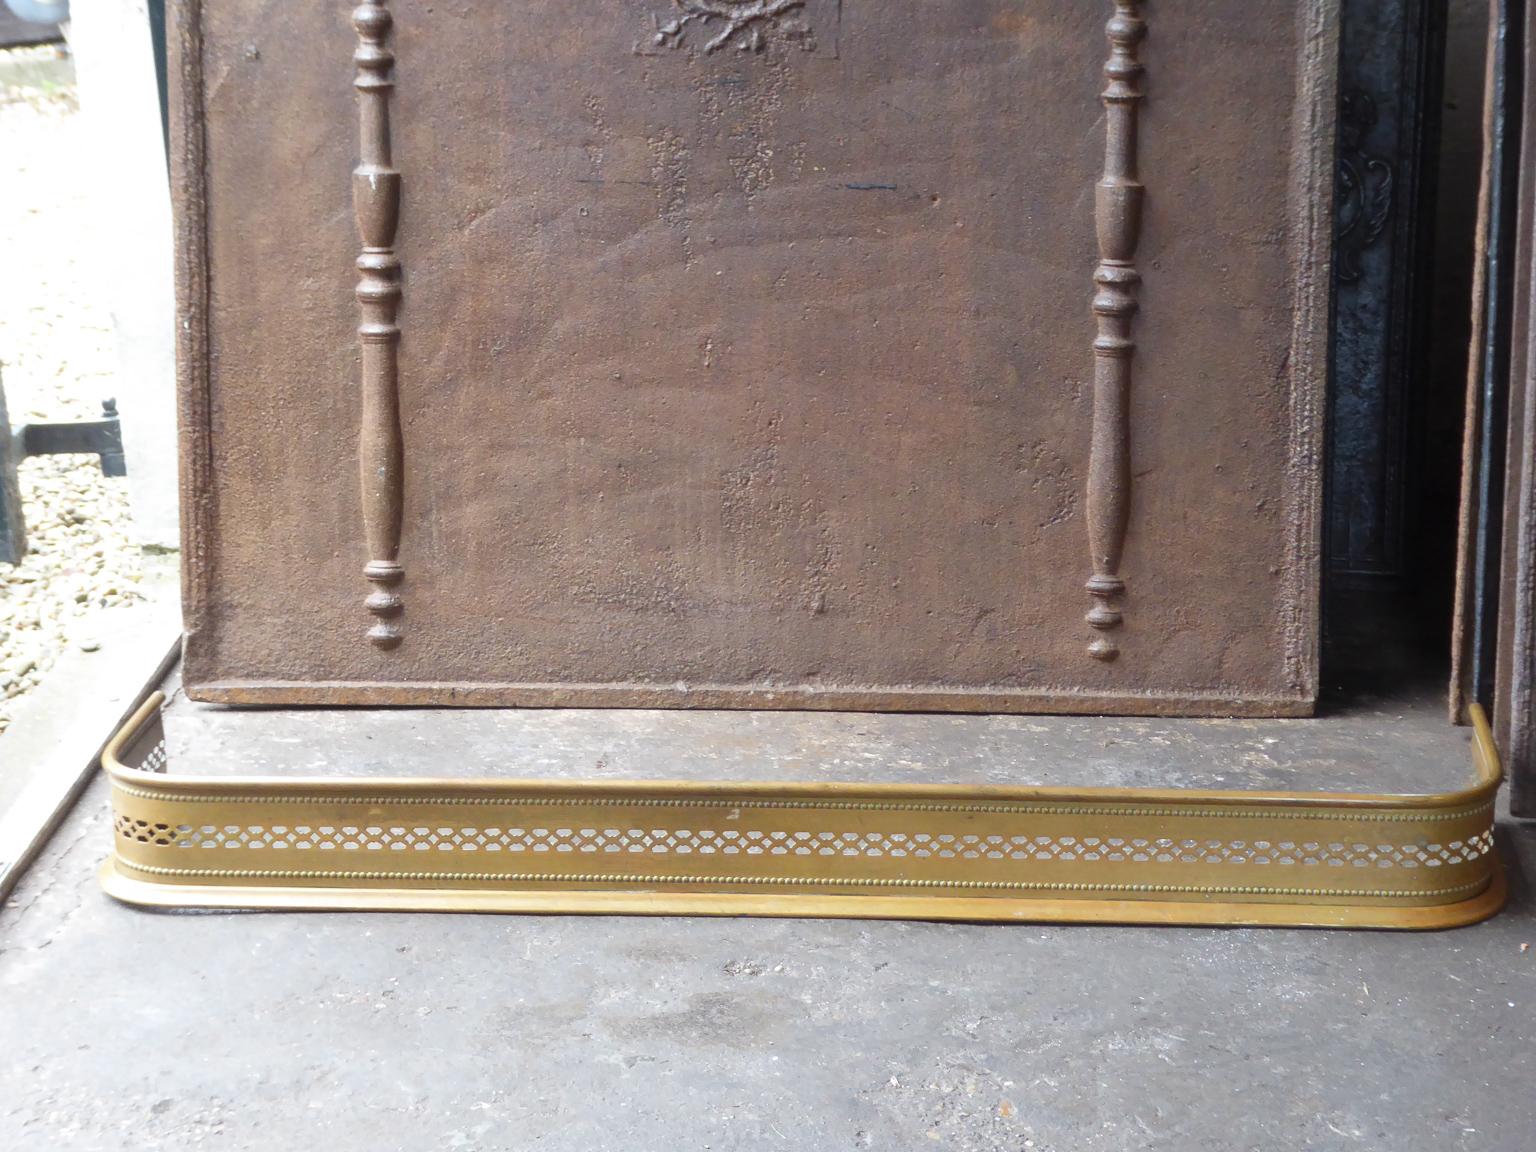 19th century English Victorian fireplace fender. The fender is made of brass. The fender is in a good condition and is fully functional.